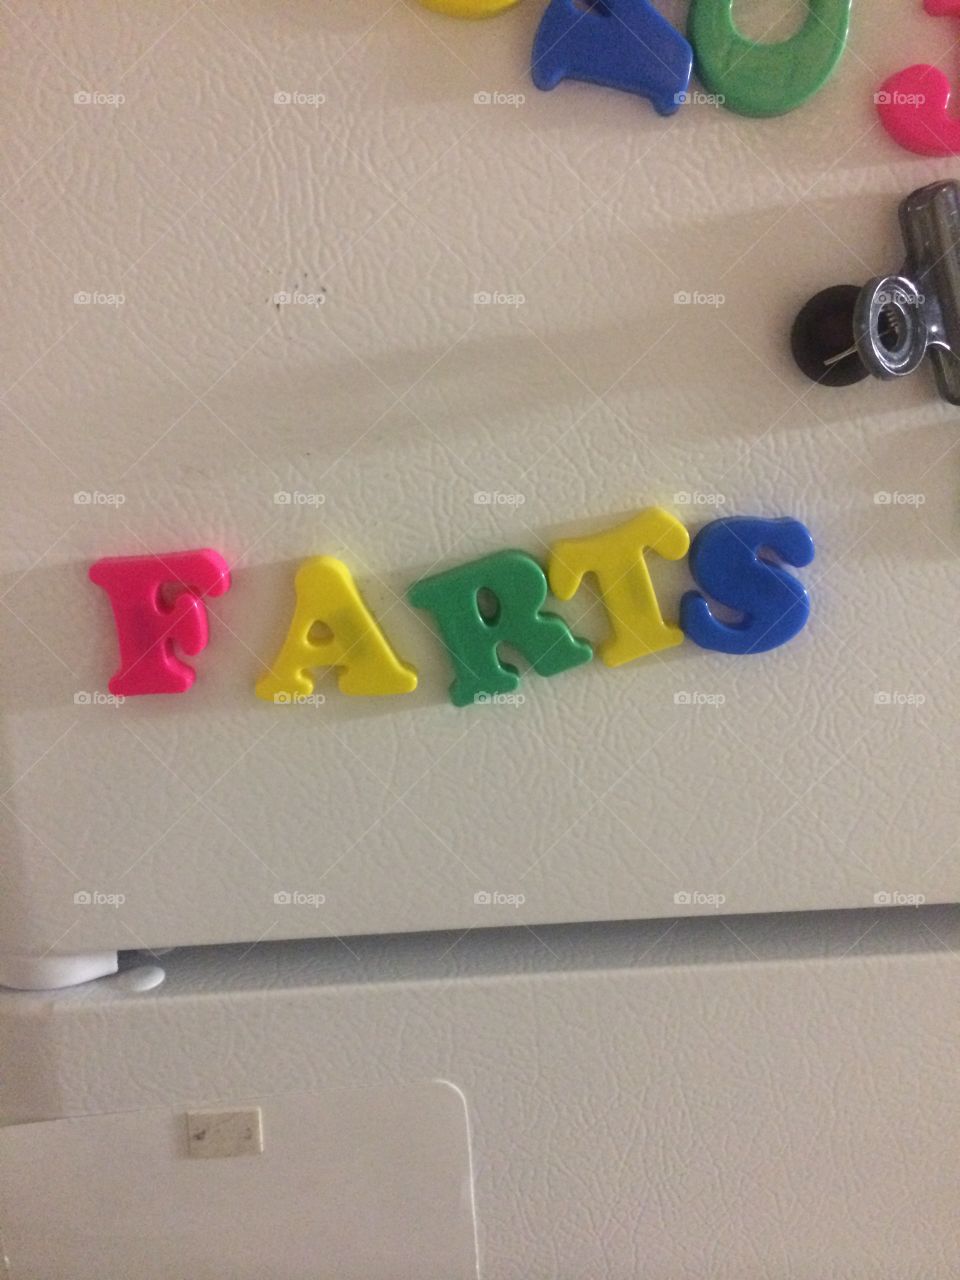 Farts written on the refrigerator with magnets 